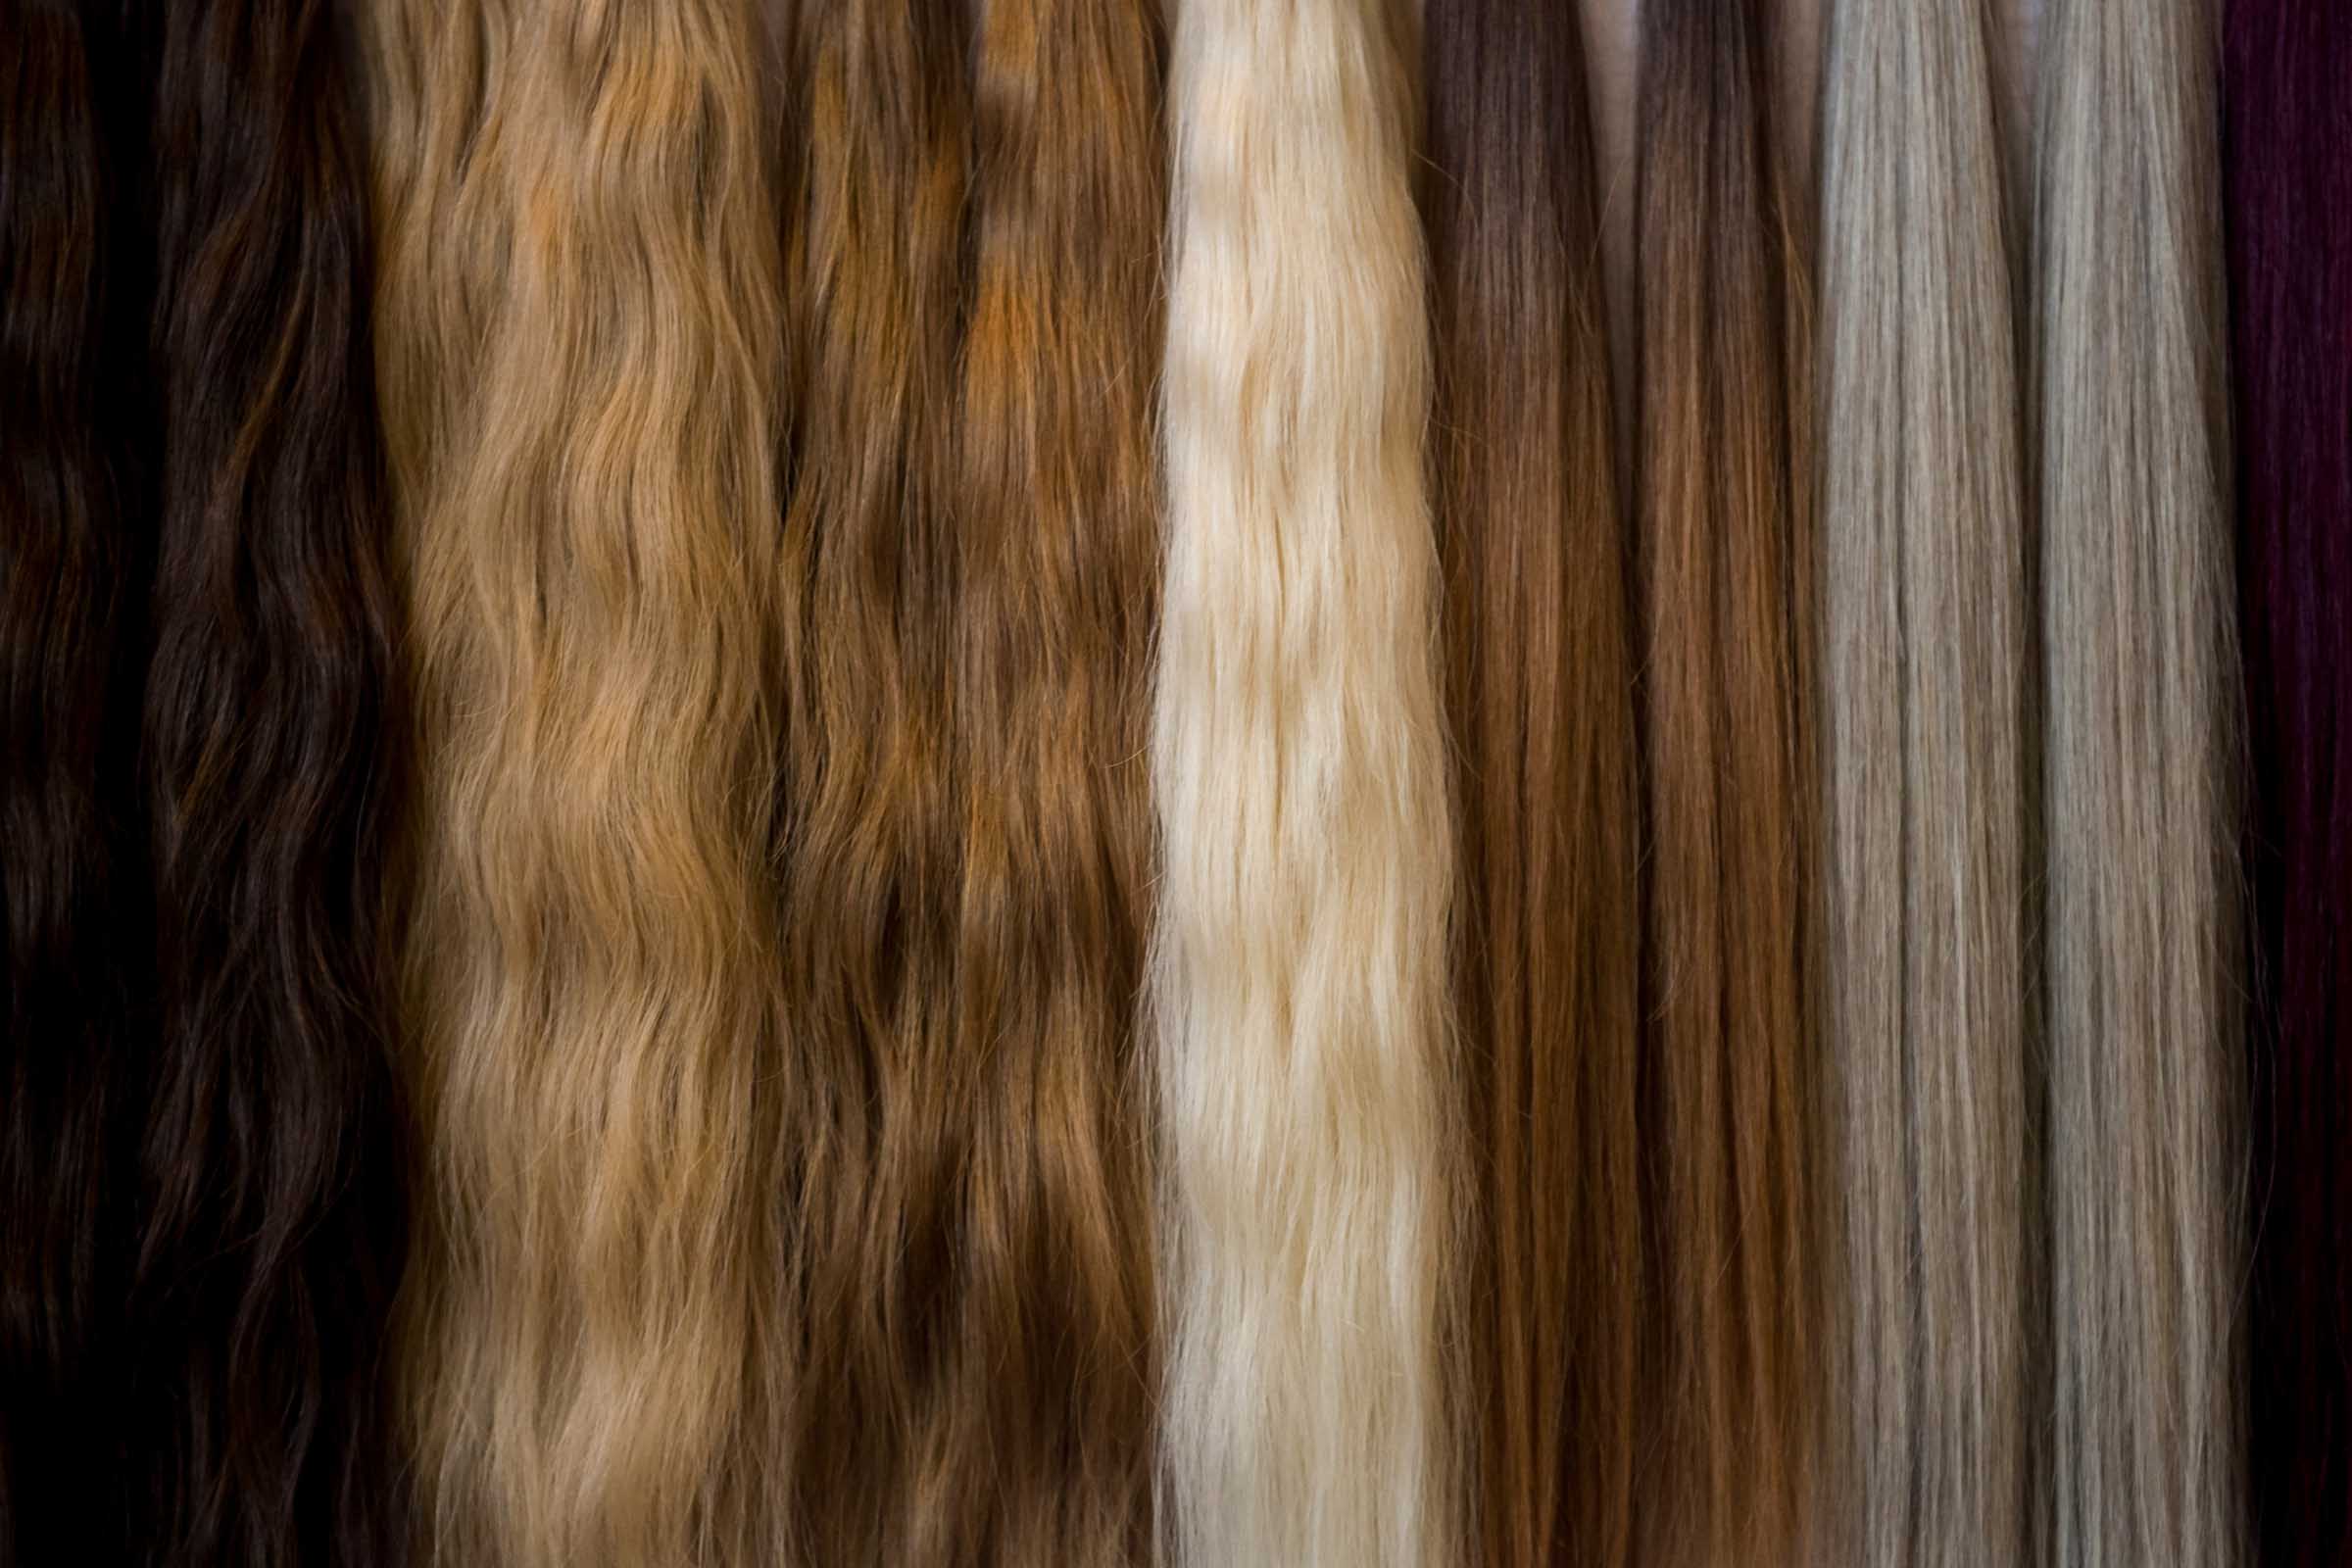 10 Questions to Ask Your Stylist Before Getting Hair Extensions